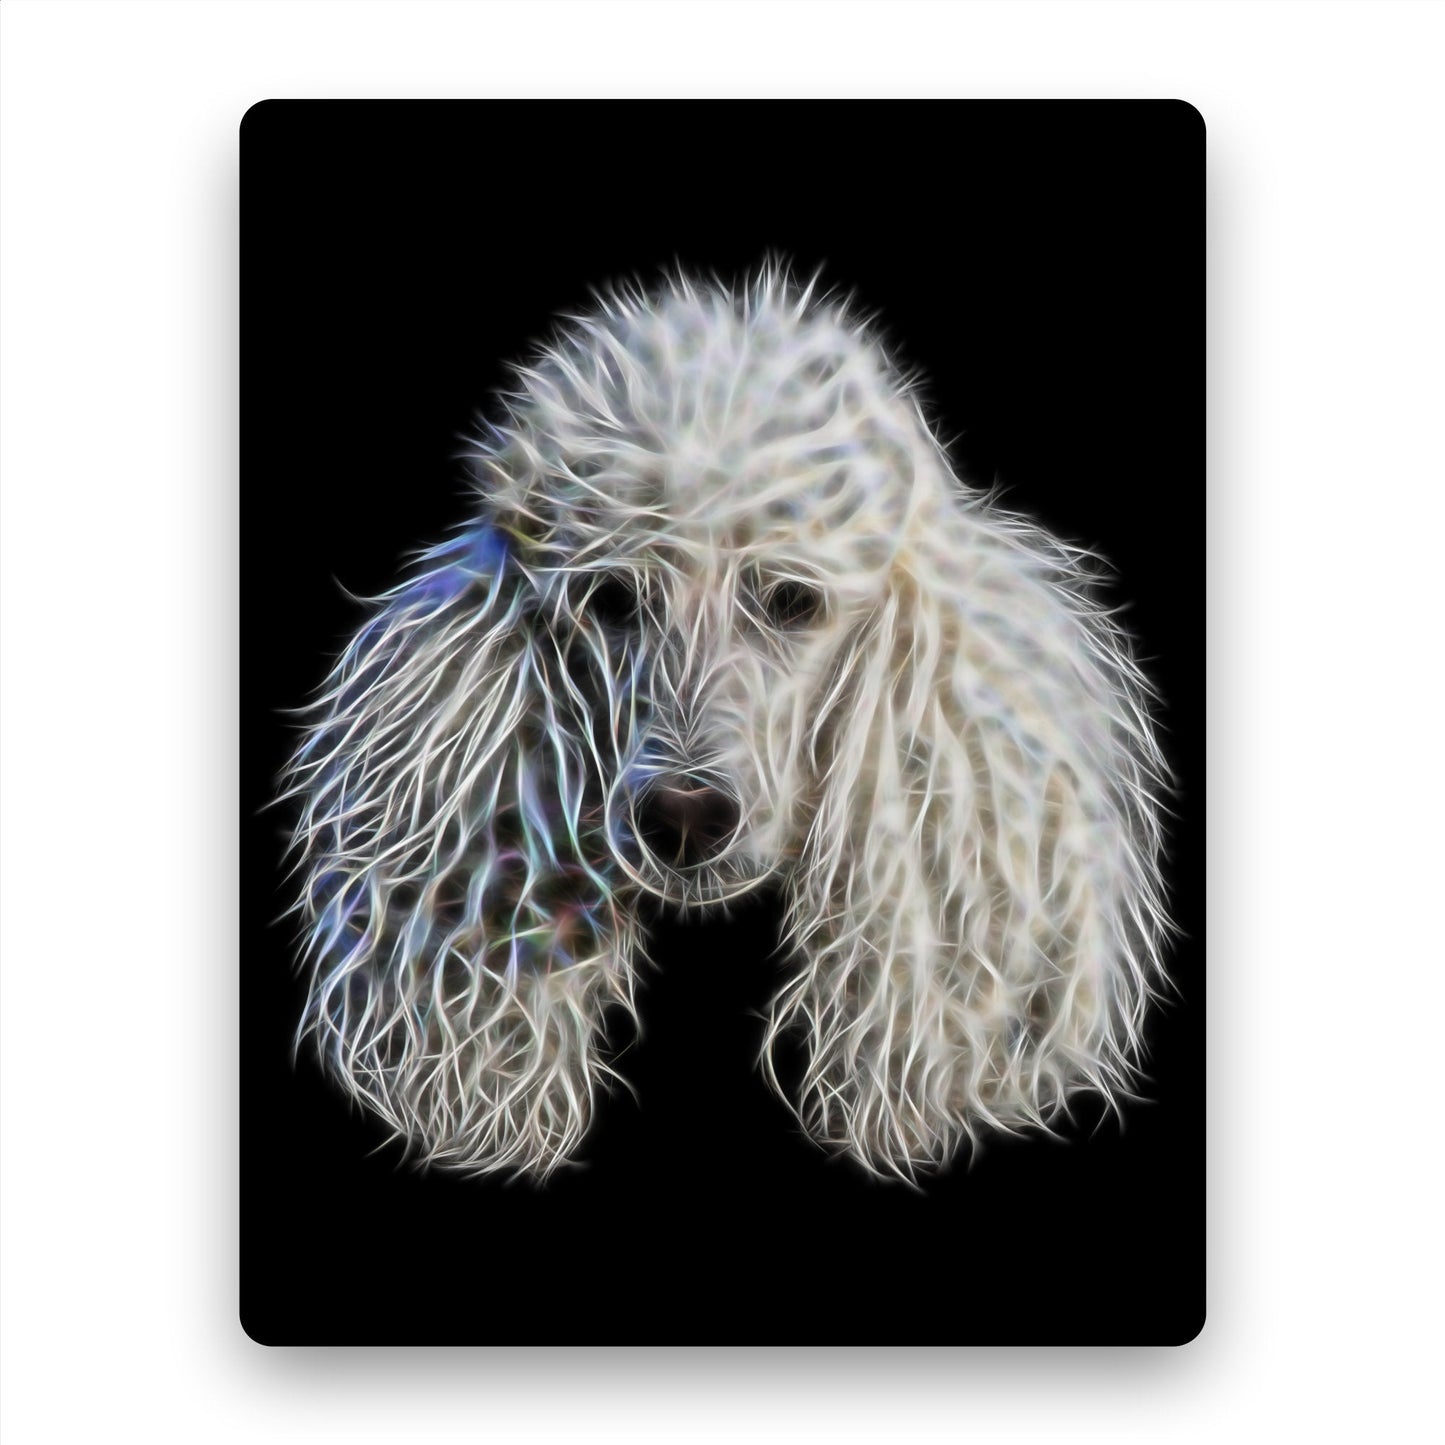 White Standard Poodle Metal Wall Plaque with Stunning Fractal Art Design.